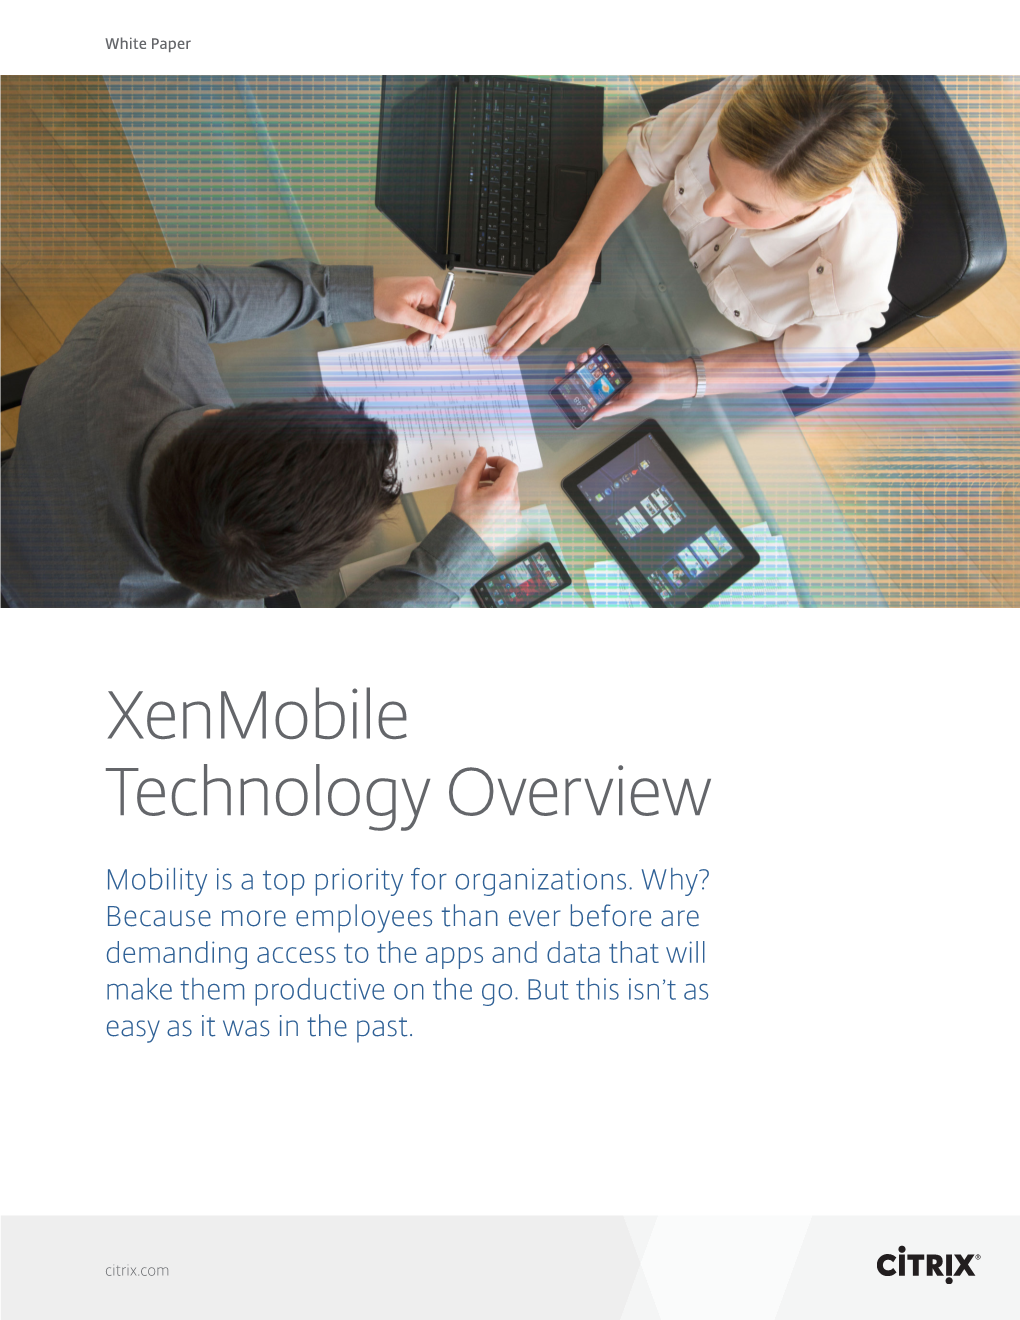 Xenmobile Technology Overview